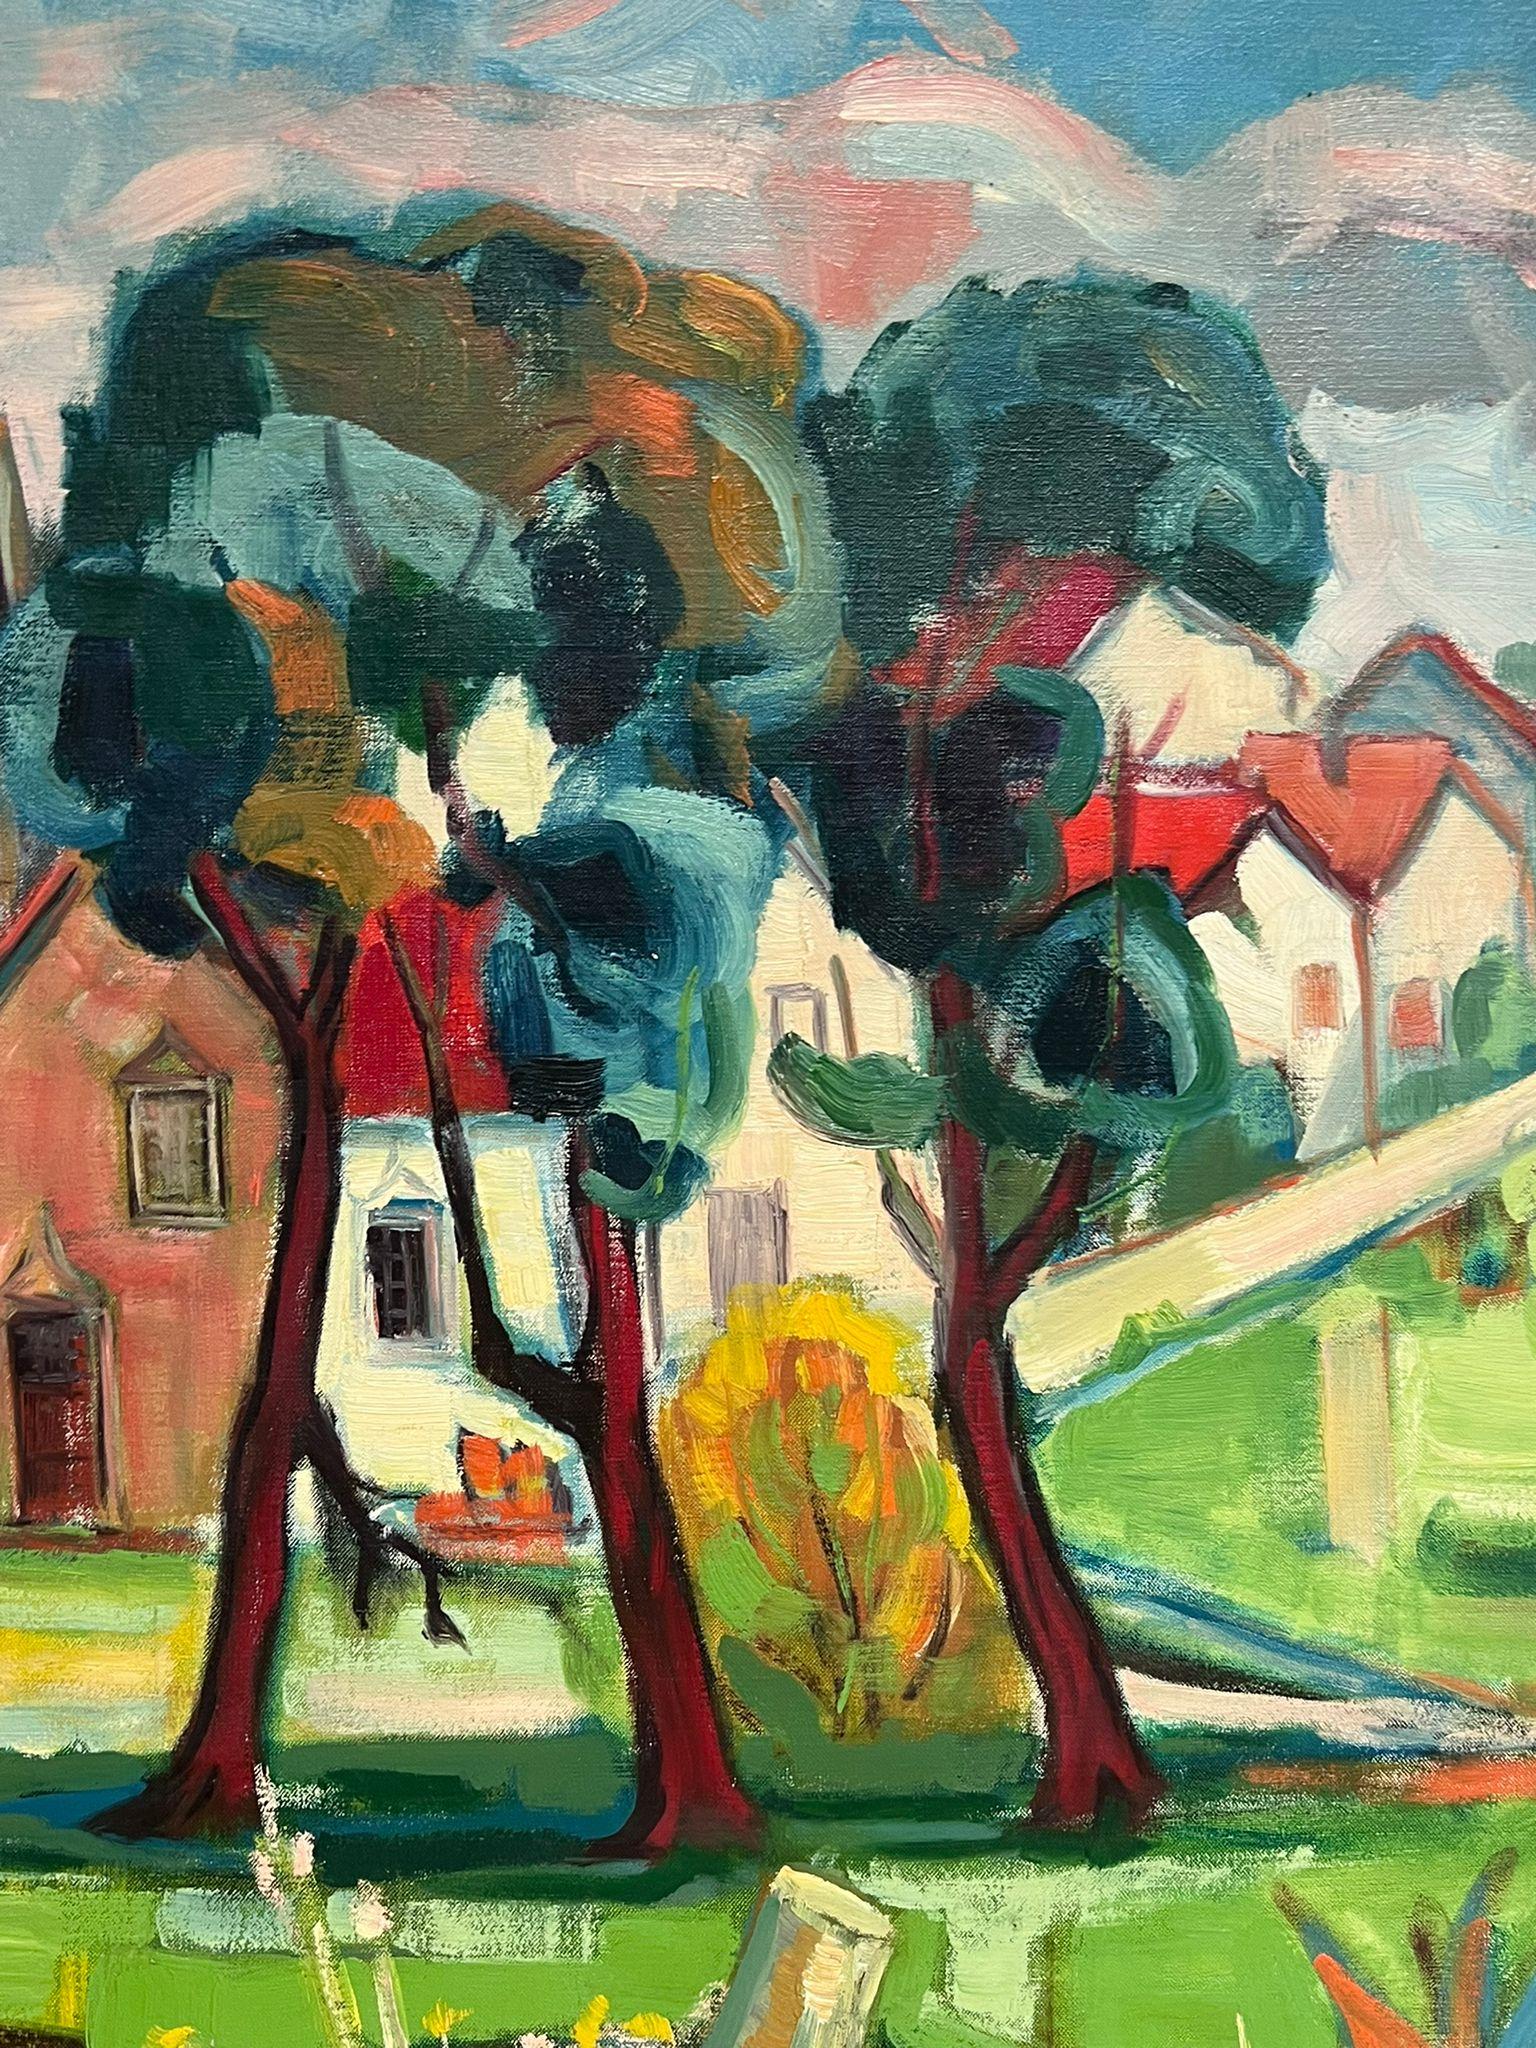 The French Town
by Michel Kritz (French 1925-1994)
oil on canvas, unframed
canvas: 32 x 24 inches
provenance: private collection, France
condition: very good and sound condition  